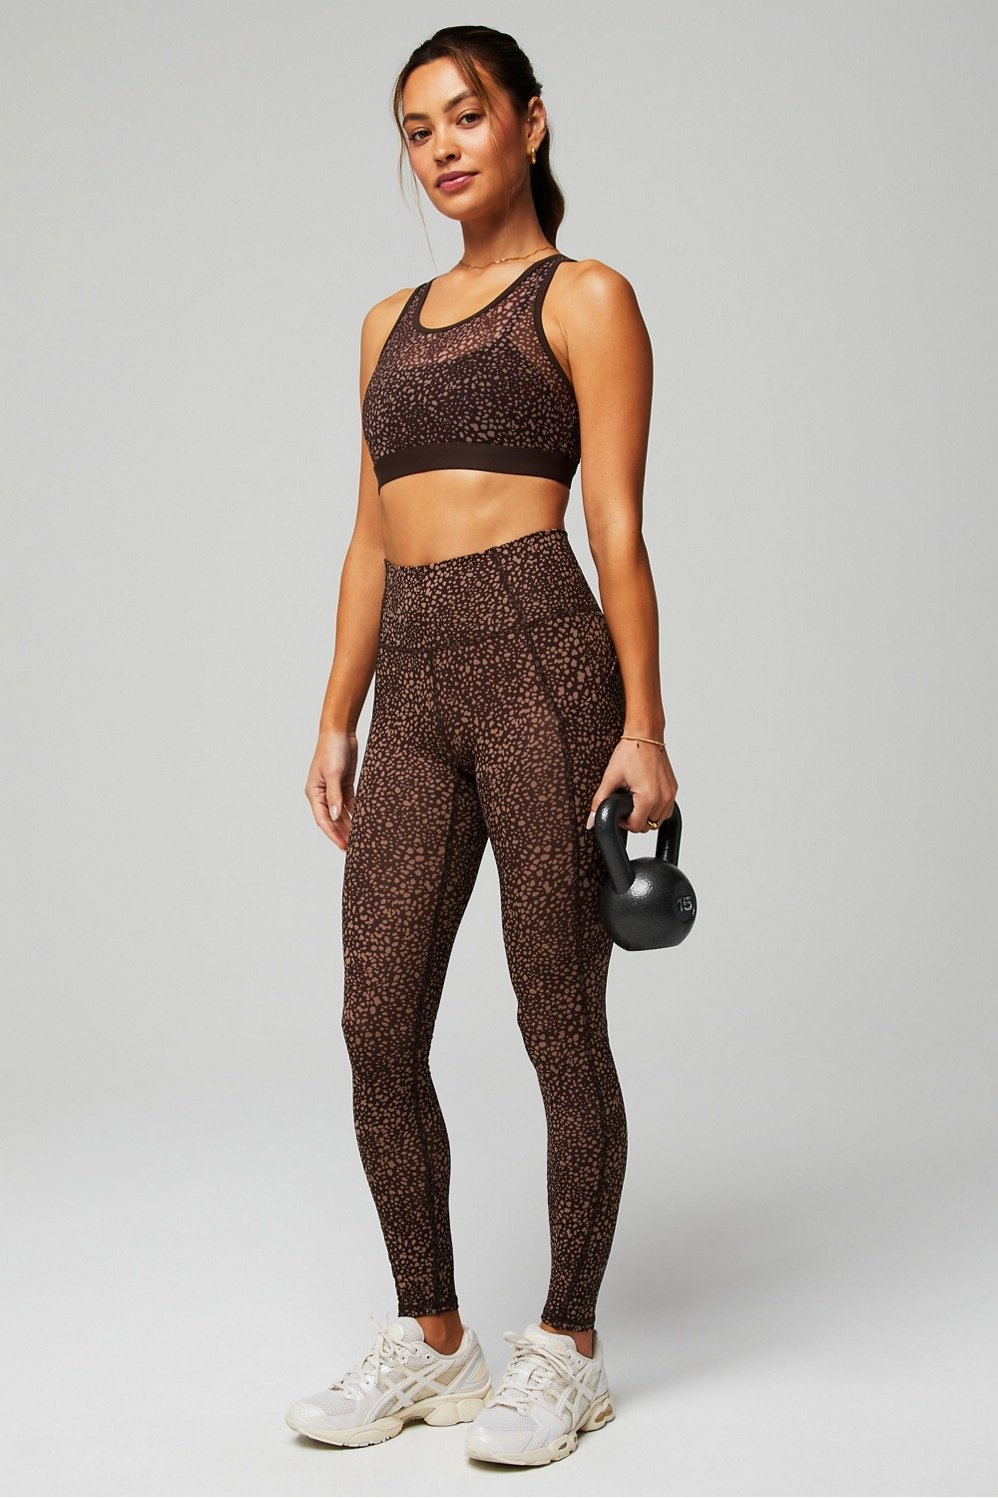 Wild Child 2-Piece Outfit - Fabletics